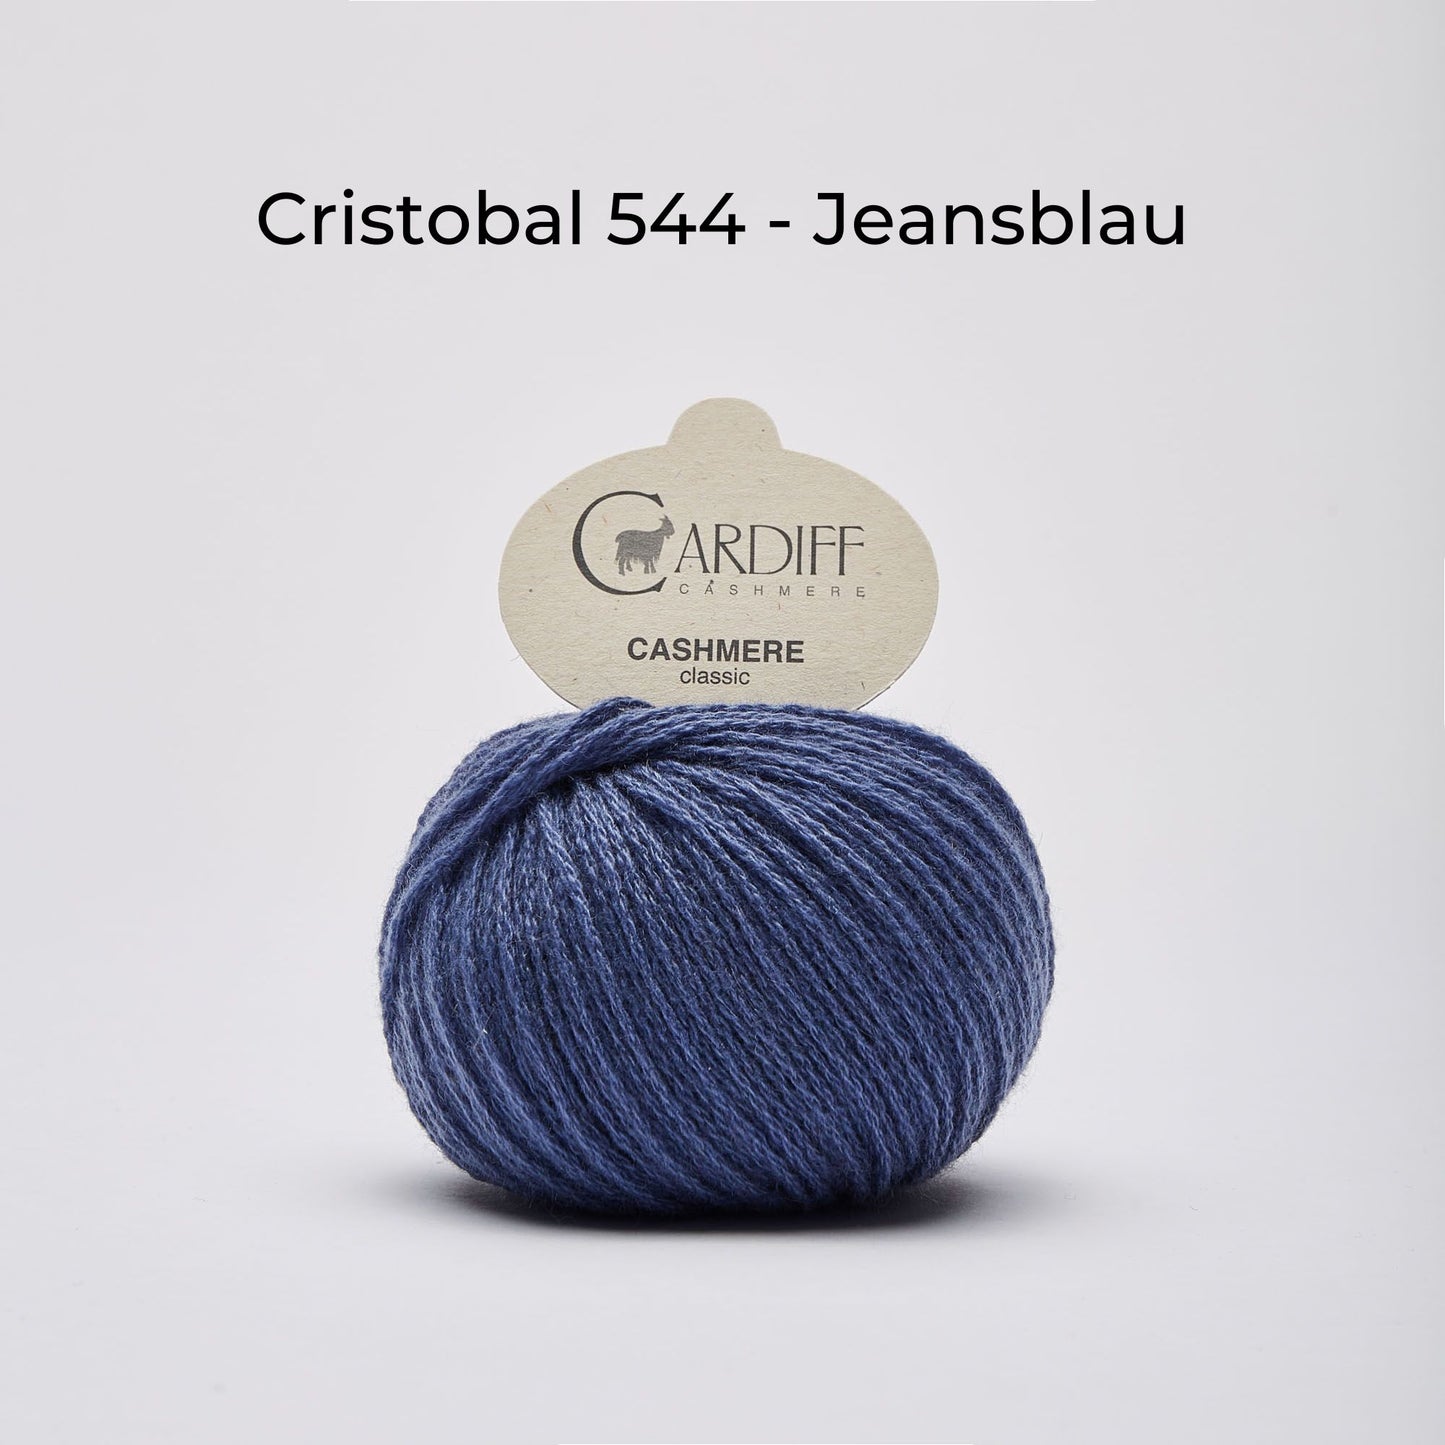 Kaschmirwolle - Cardiff Cashmere Classic 6/28 - NS 3.5-4.5 mm